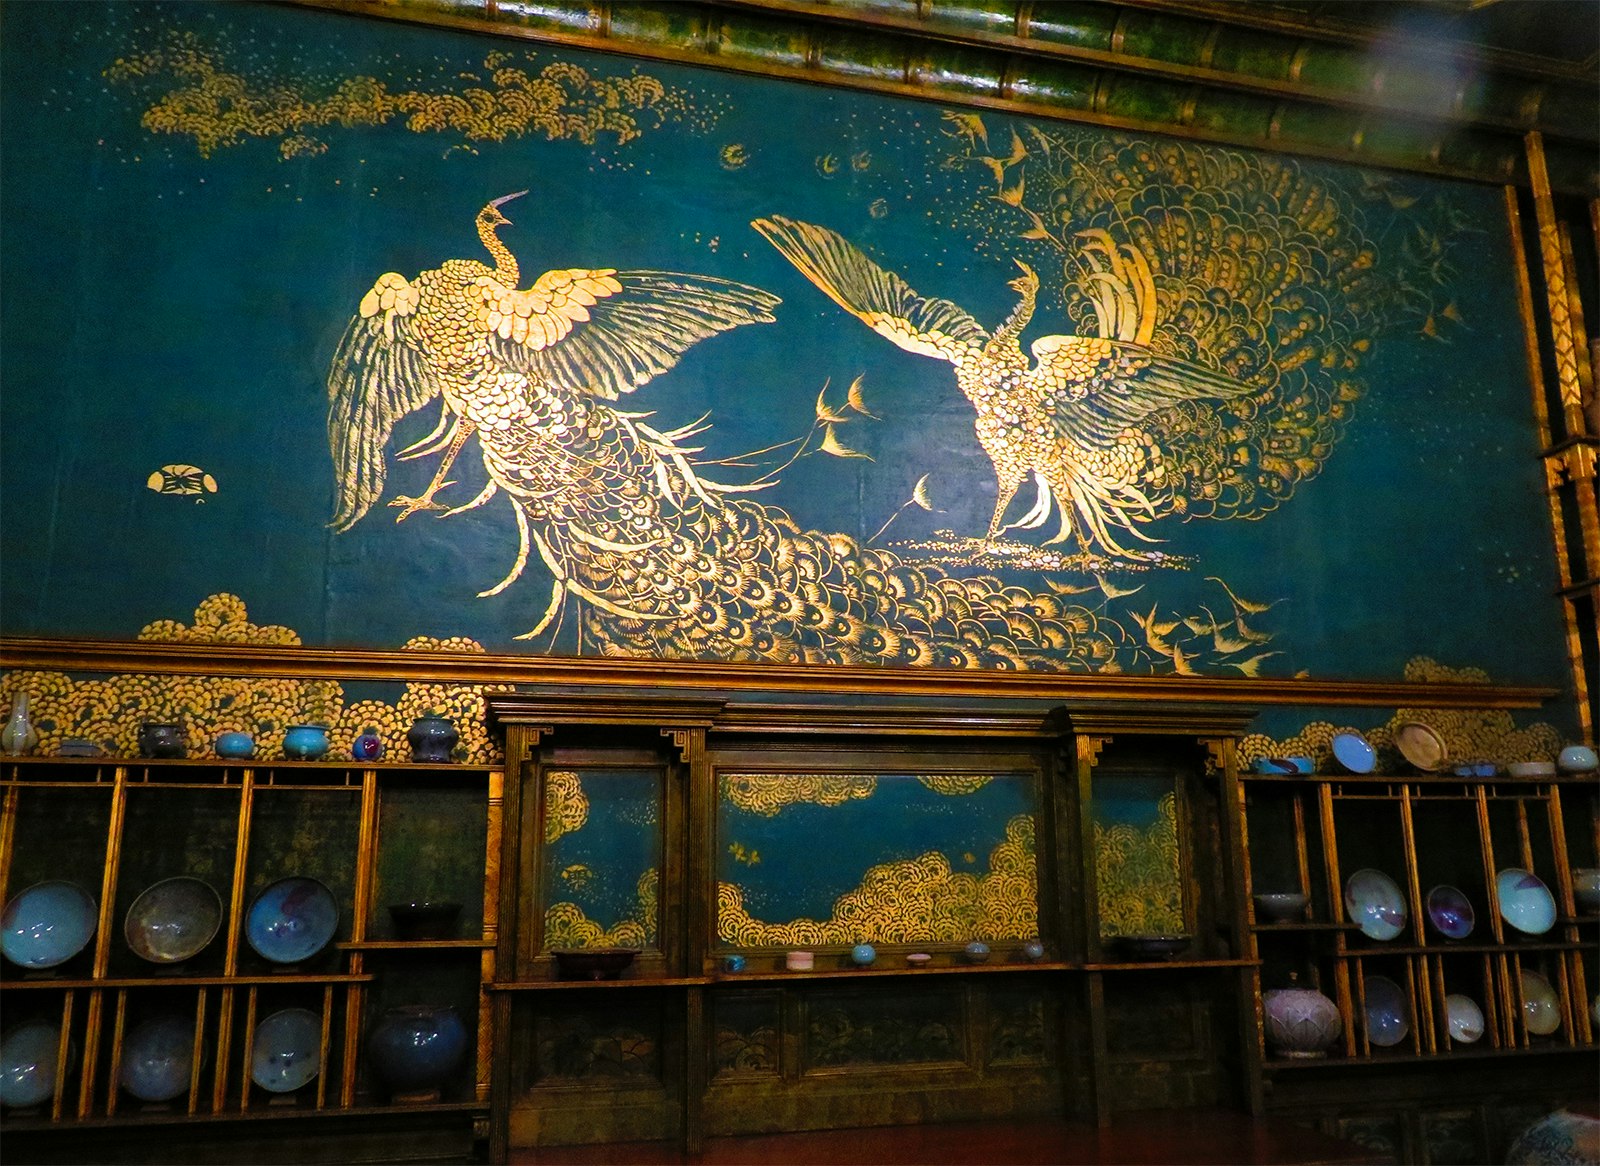 Painted peacocks fight in an ornate mural that is part of the Peacock Room